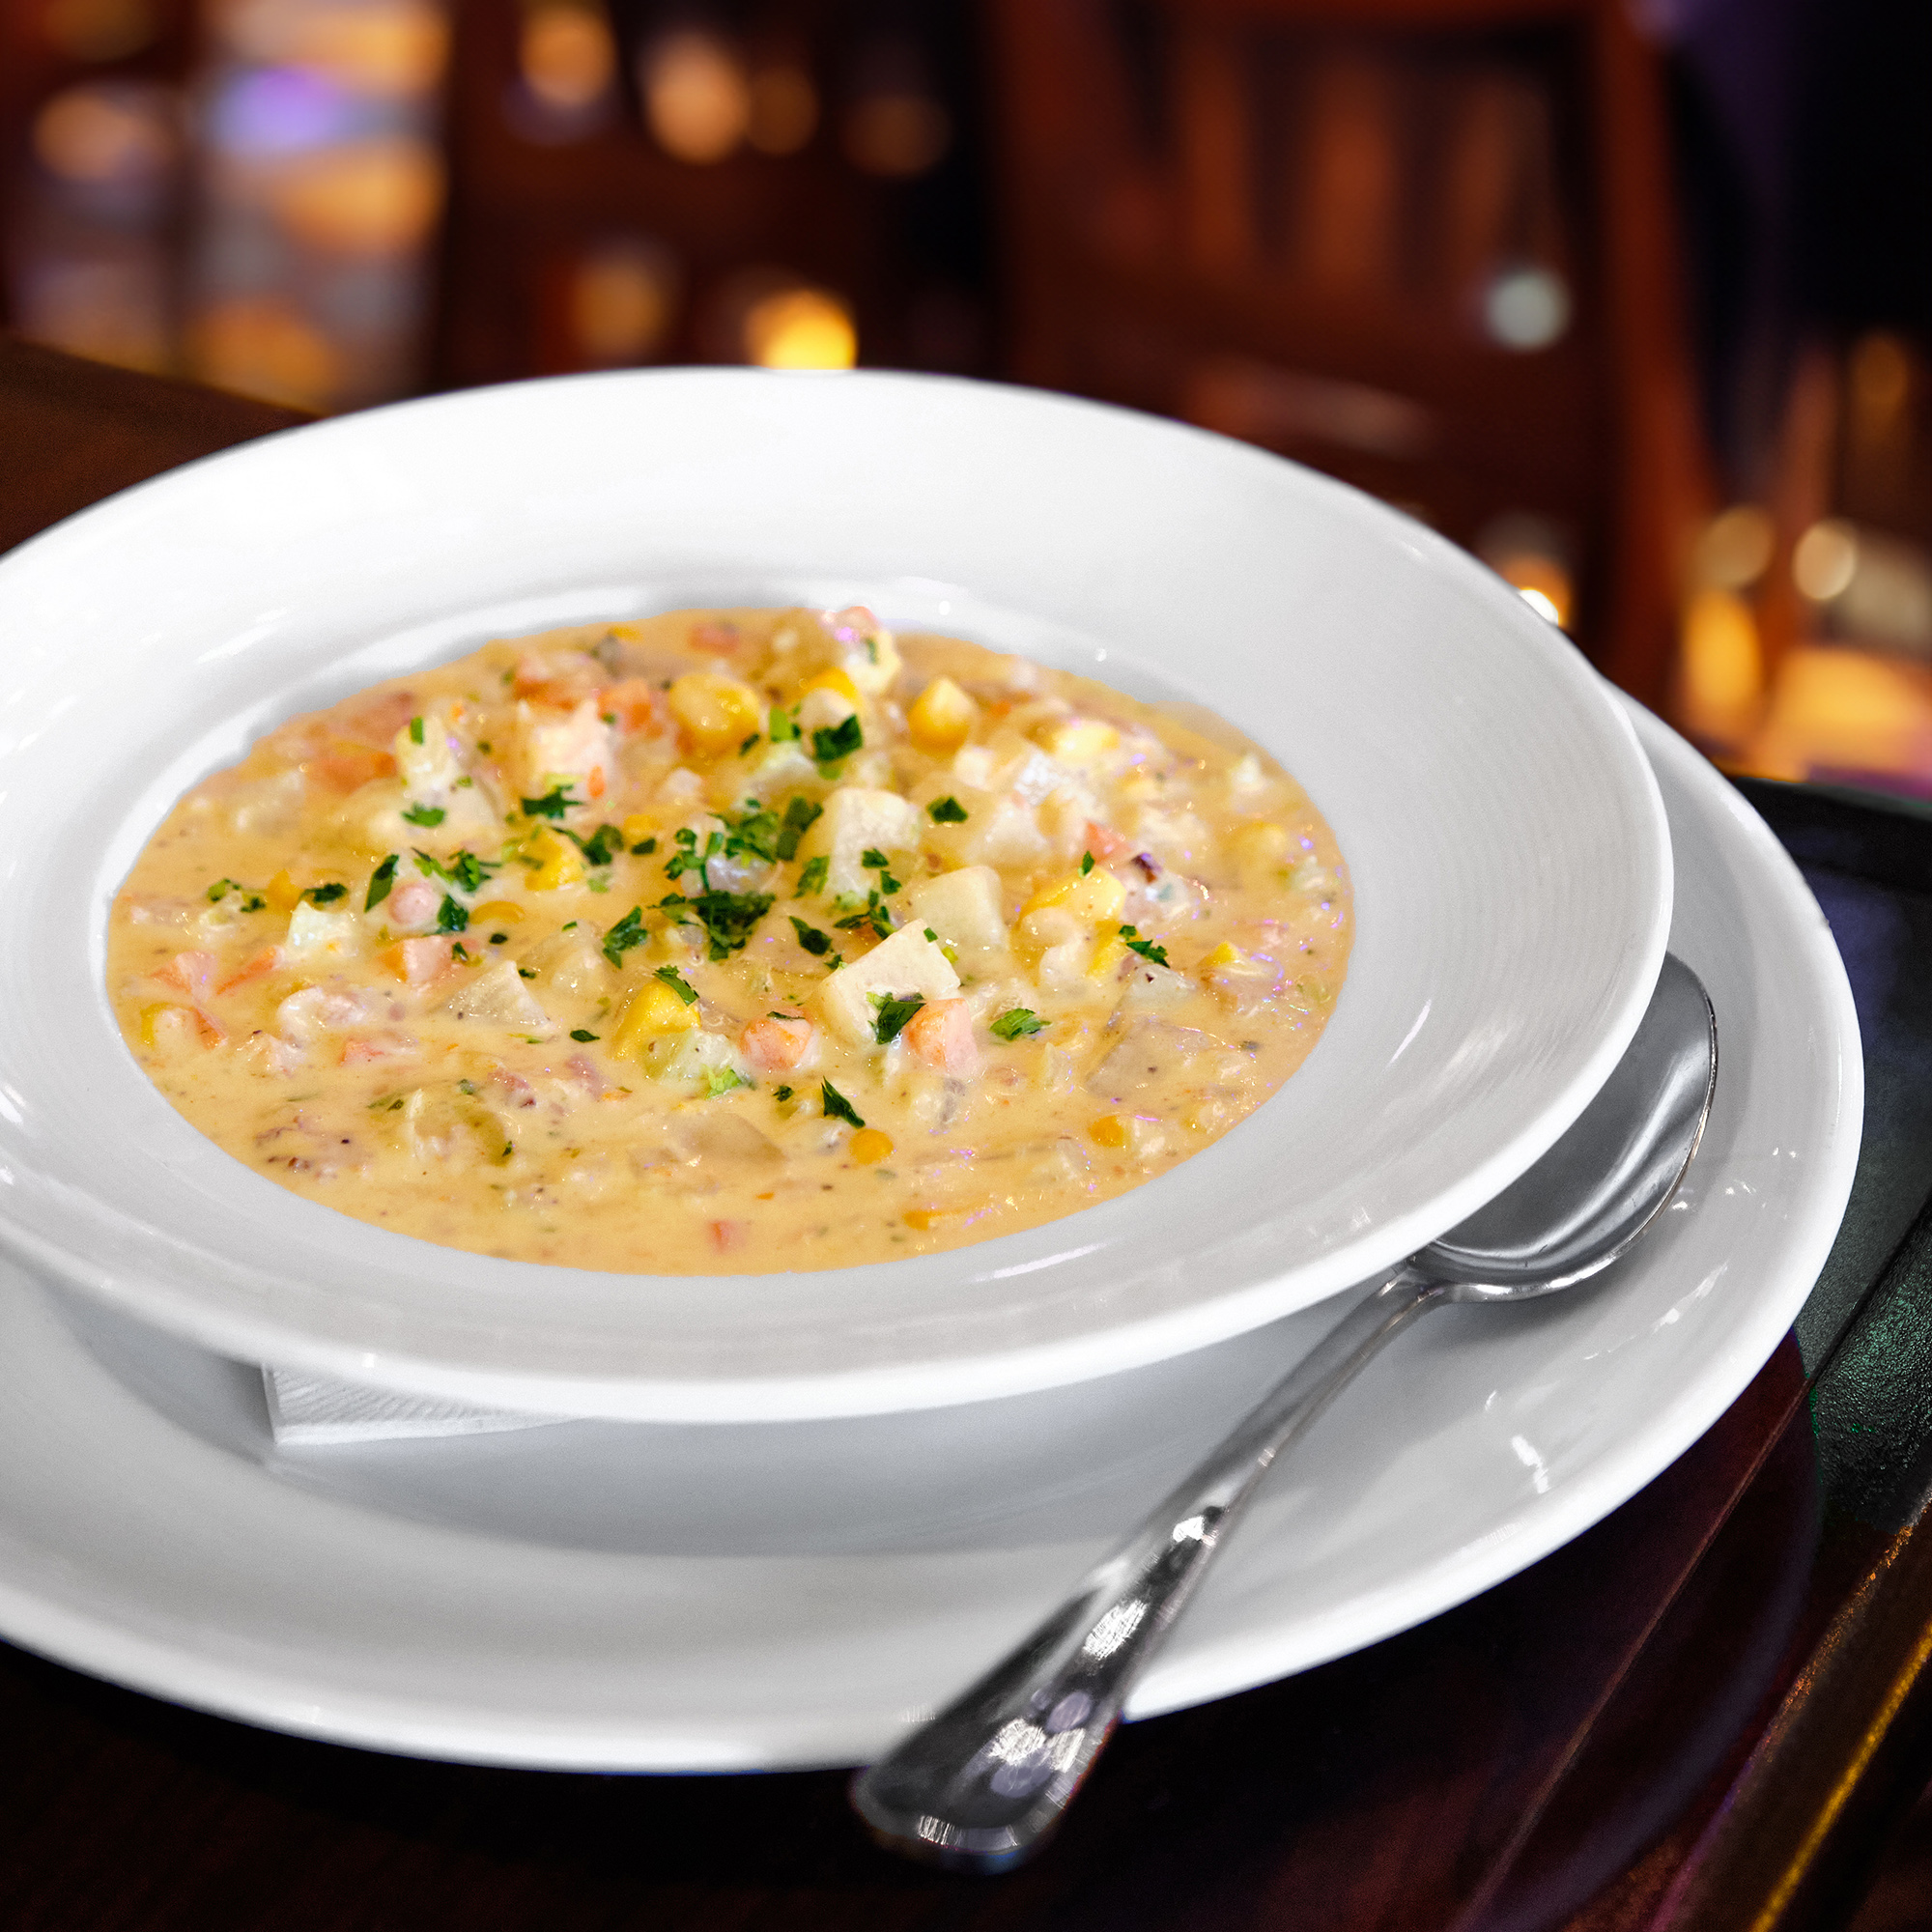 Corn And Crab Chowder Recipe Bonefish Grill: Step by Step Guide